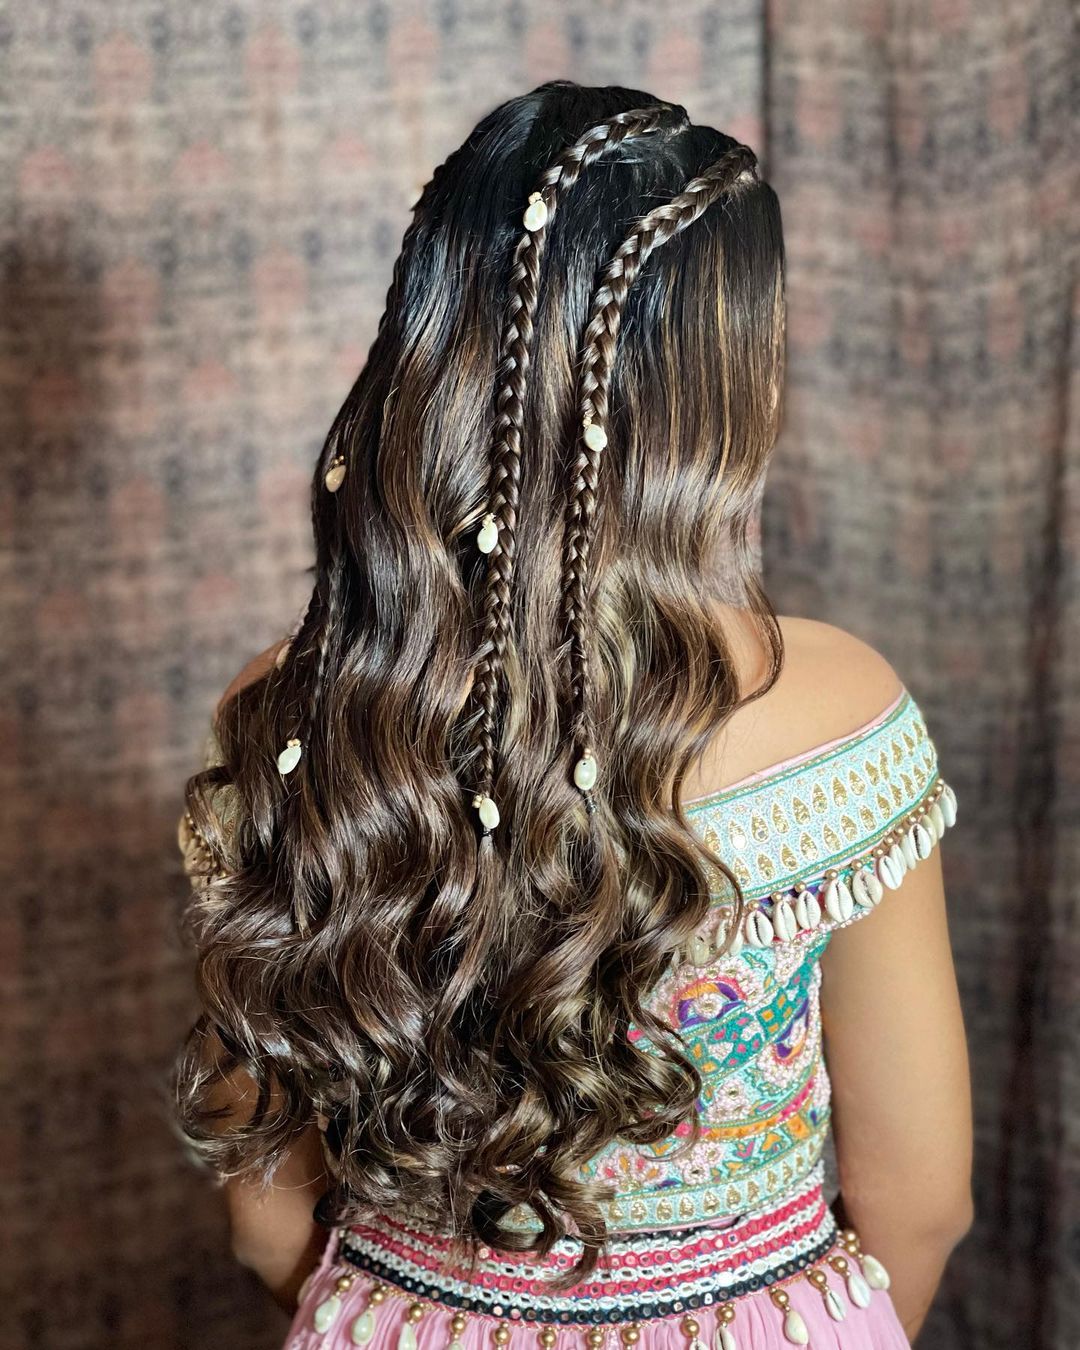 Hair Style Accessories for Indian Wedding Hairstyles